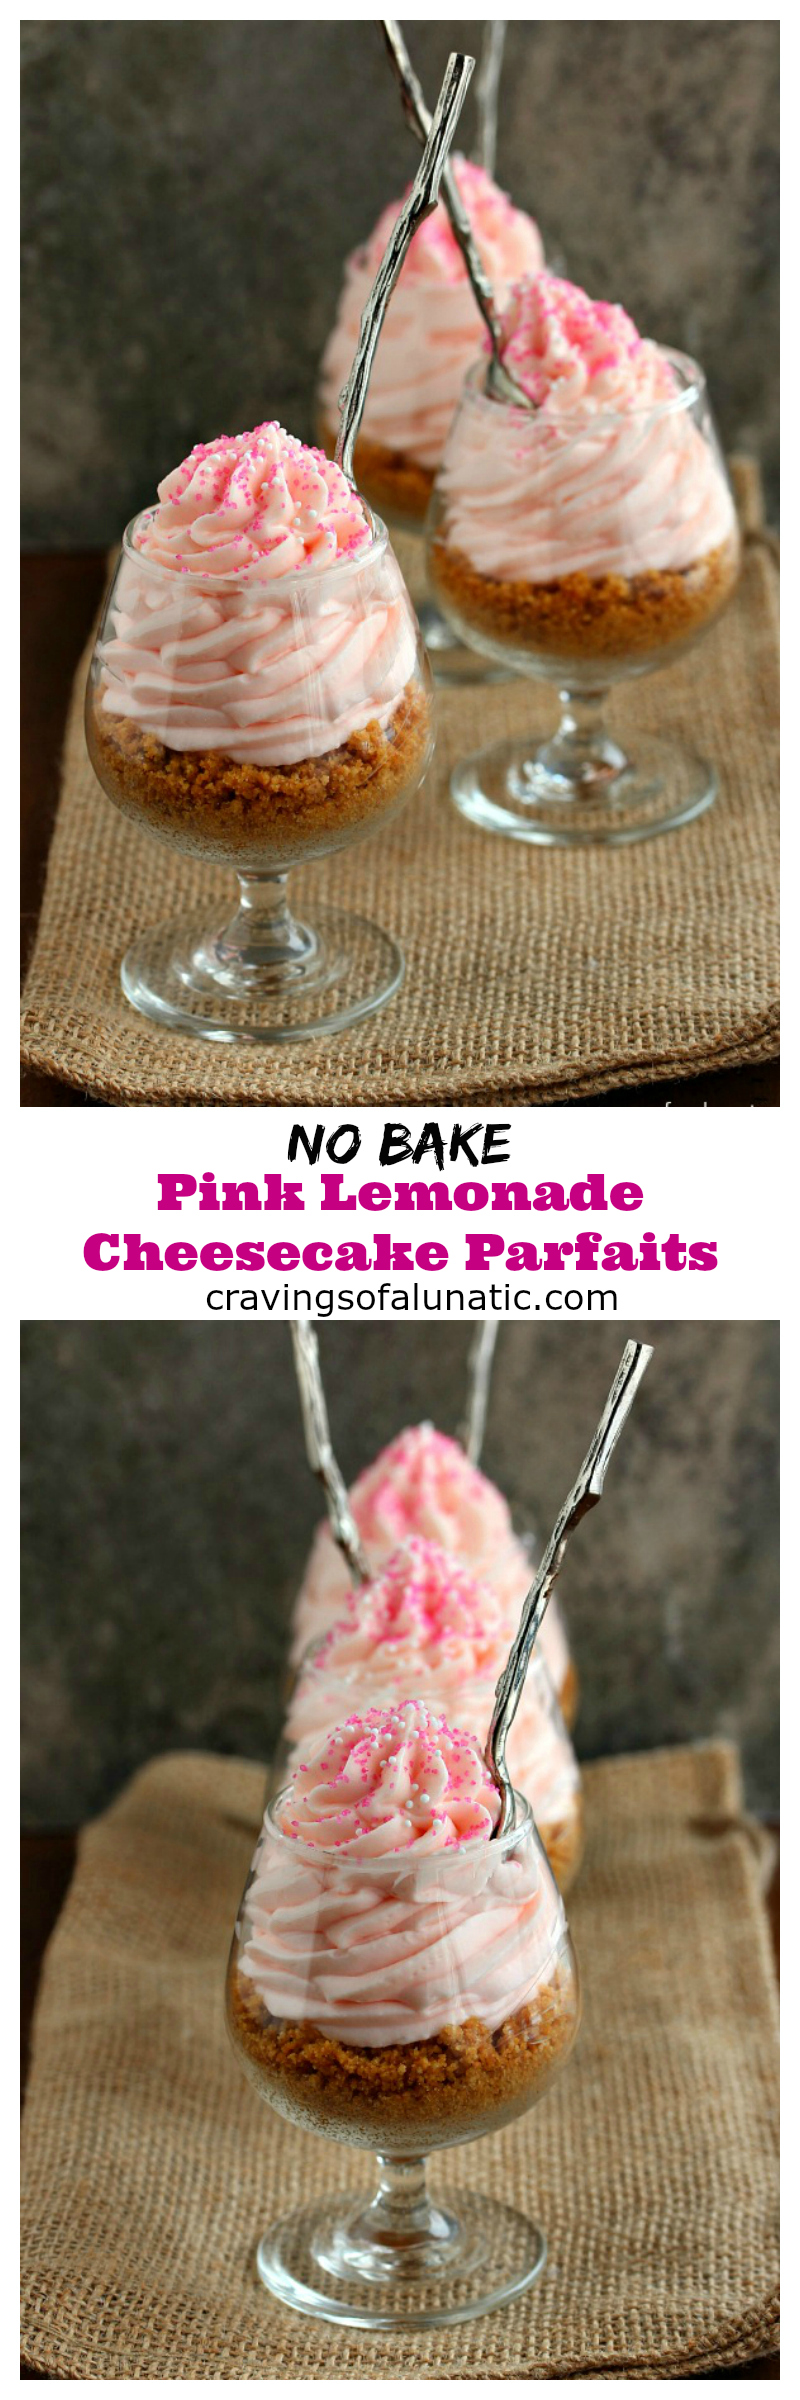 No Bake Pink Lemonade Cheesecake Parfaits from cravingsofalunatic.com- These super easy to make No Bake Pink Lemonade Cheesecake Parfaits are absolutely scrumptious. These will have you stealing them from your family members. No lie! (@CravingsLunatic) 